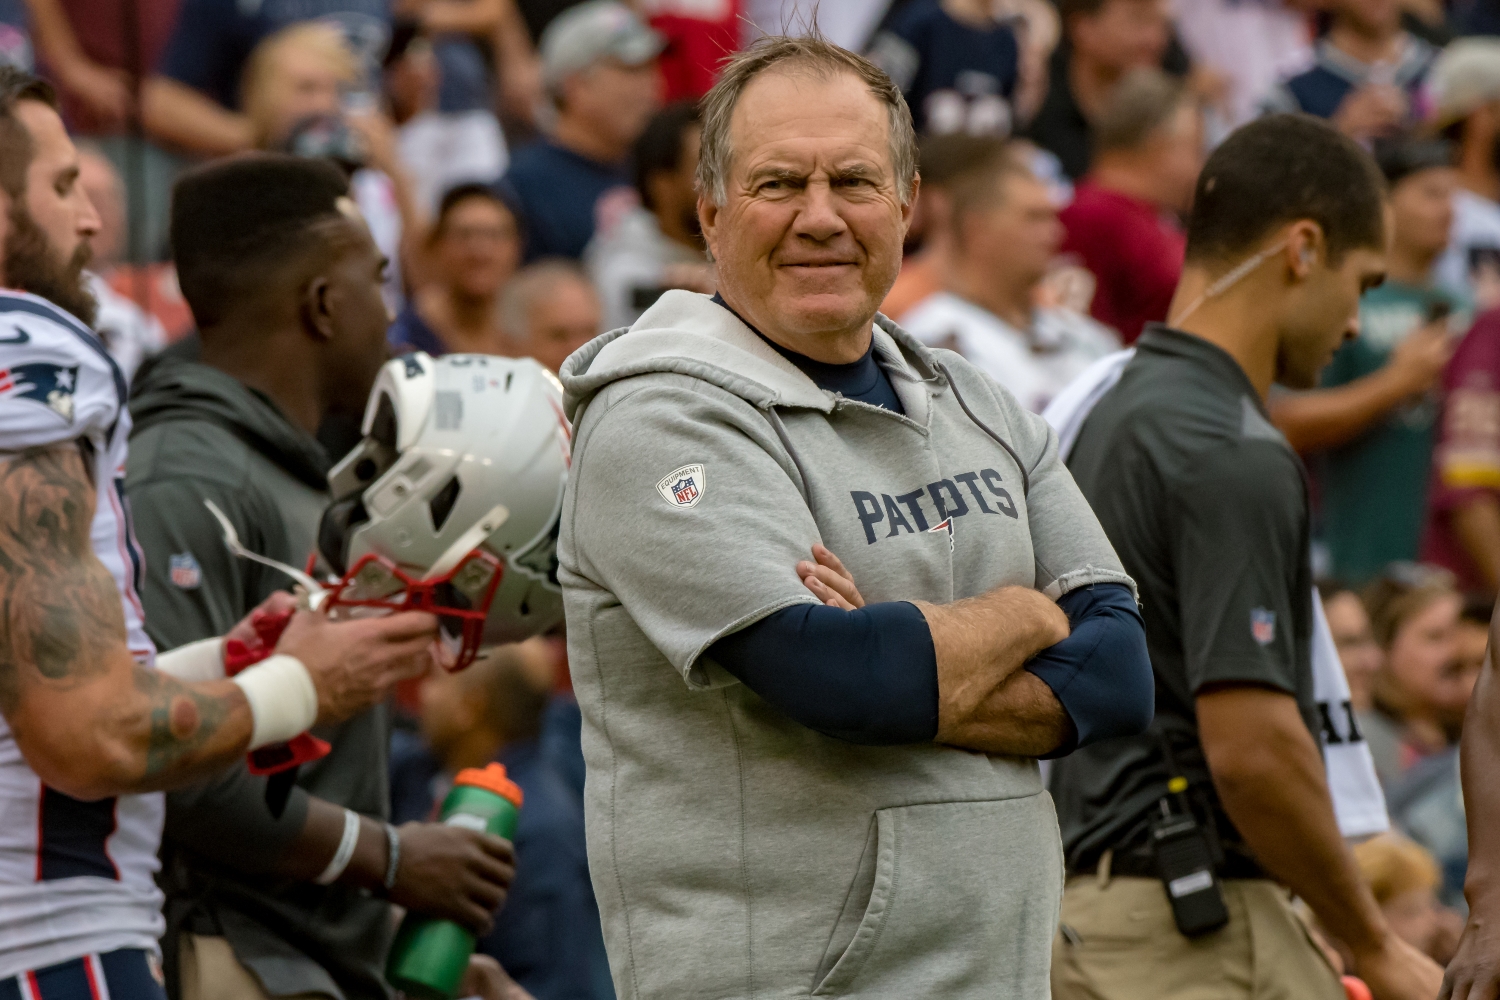 New England Patriots head coach Bill Belichick stands with his arms crossed during a game against the Washington Football Team from the 2019 season.